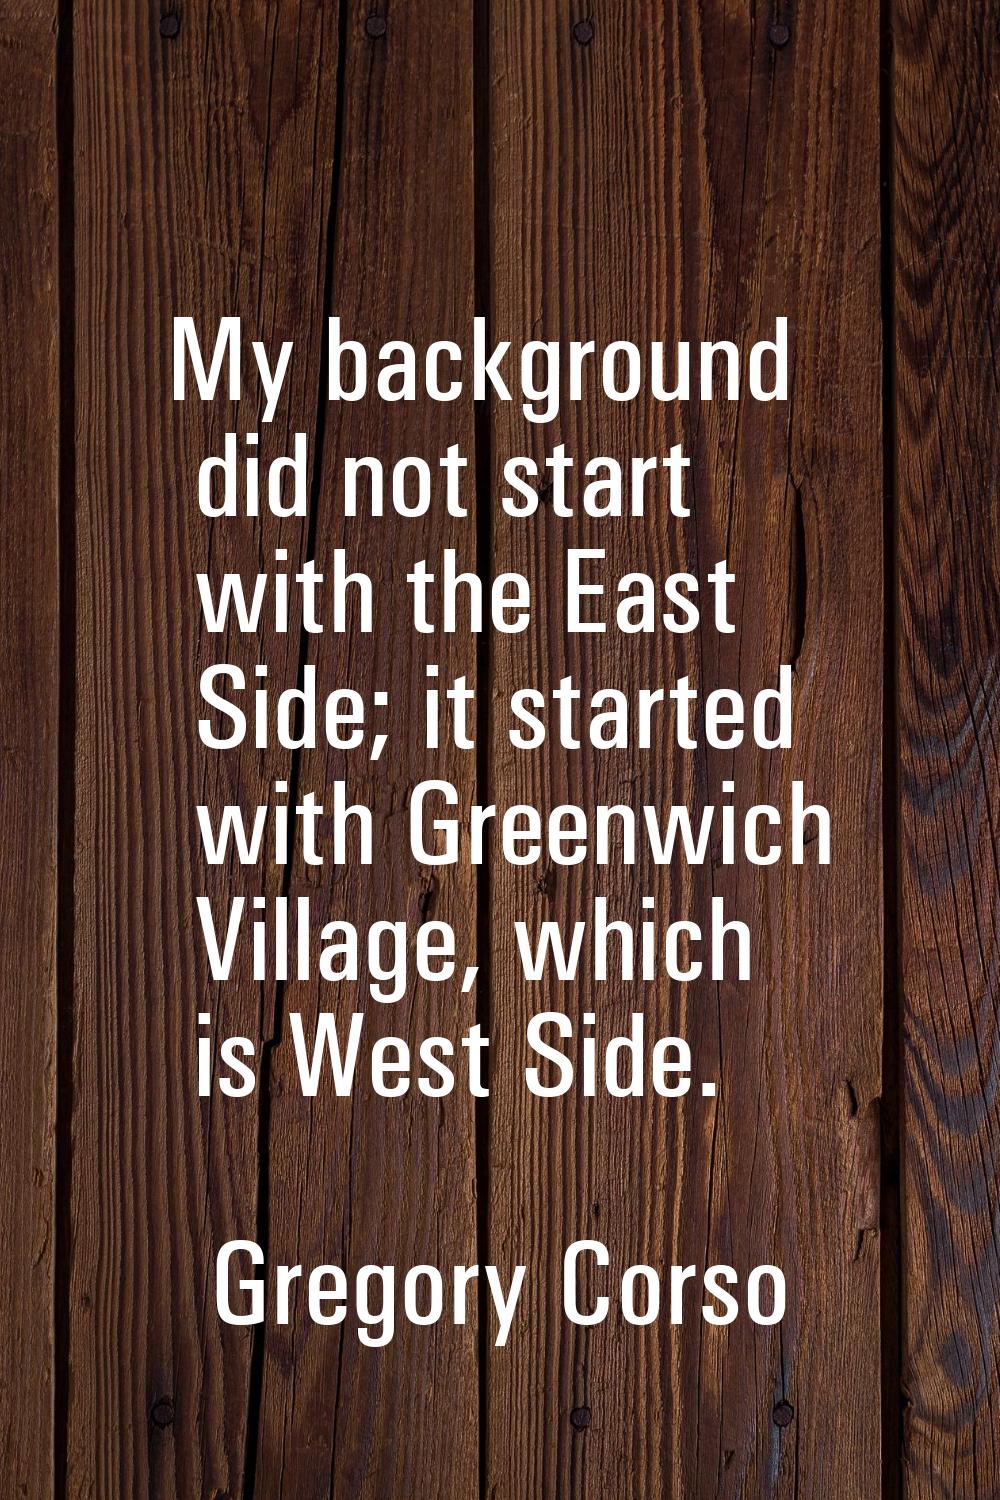 My background did not start with the East Side; it started with Greenwich Village, which is West Si